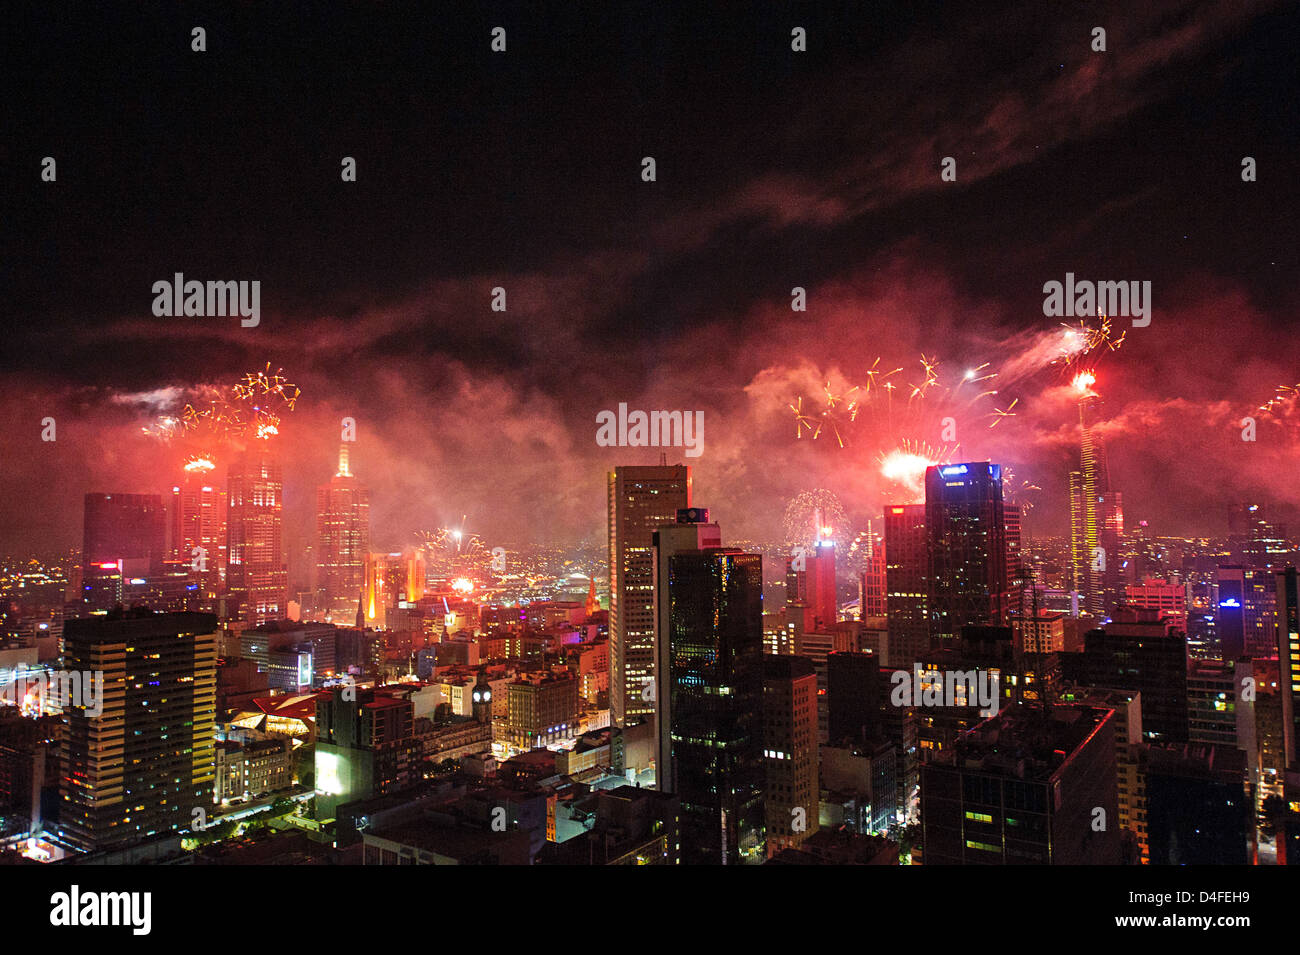 New Year fireworks light up the sky over Melbourne, the capital of the Australian state of Victoria. Stock Photo